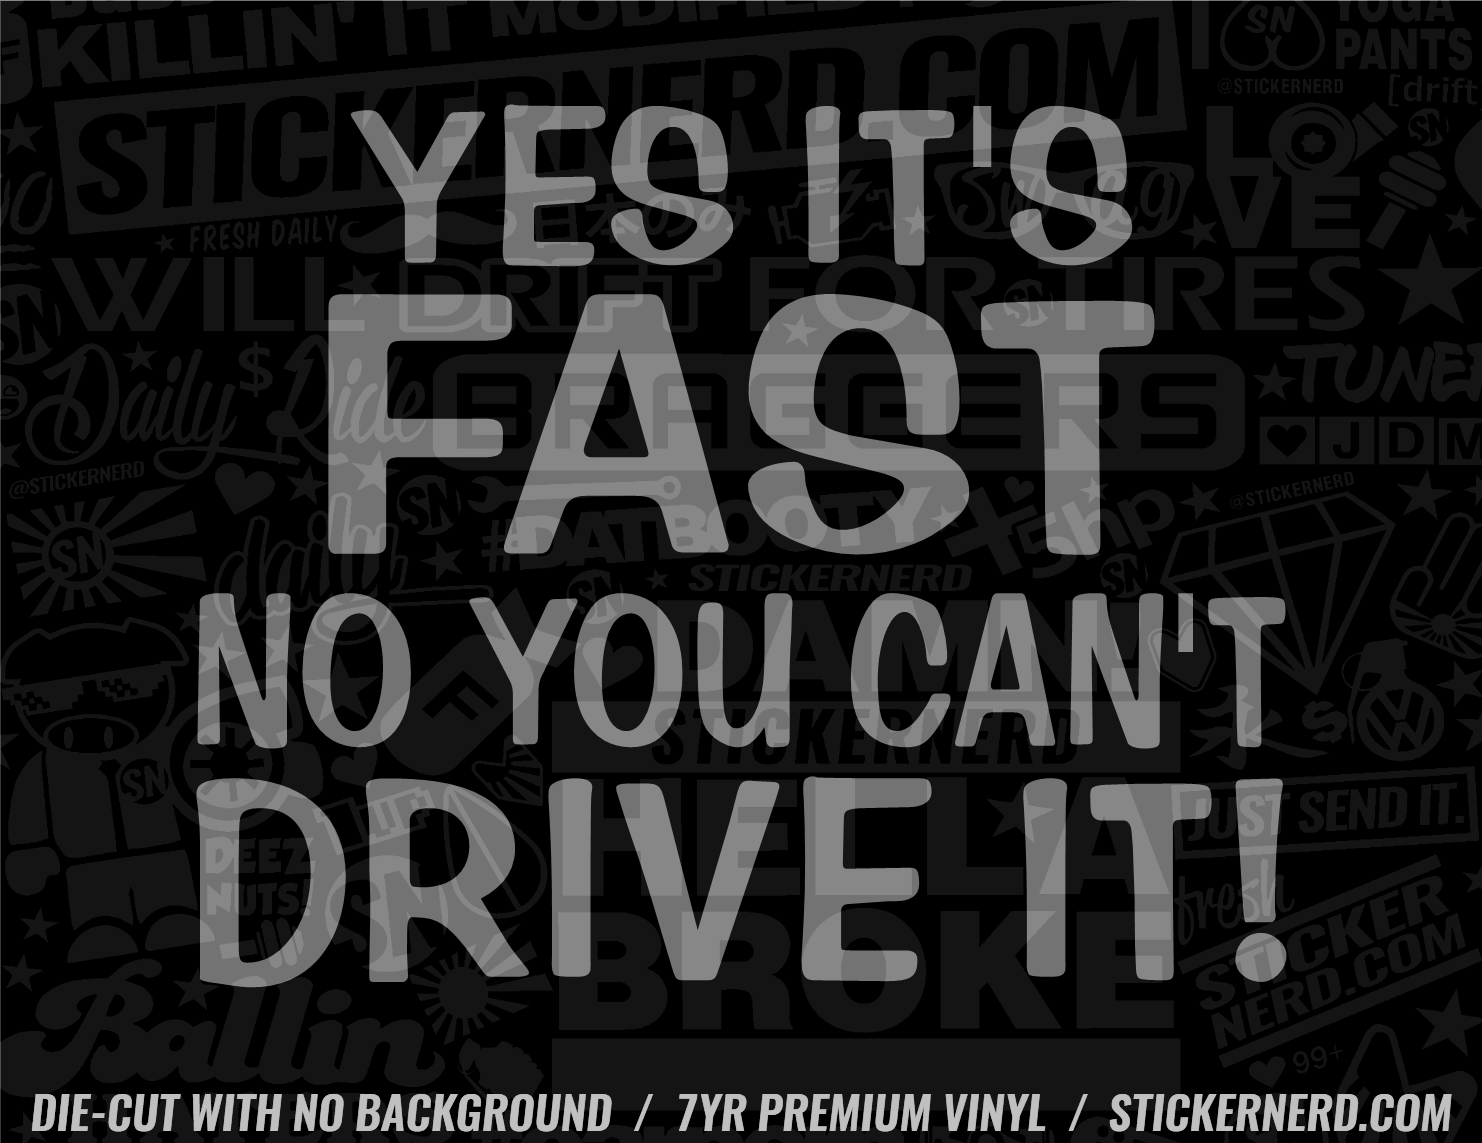 Yes It's Fast No You Can't Drive It Sticker - Window Decal - STICKERNERD.COM